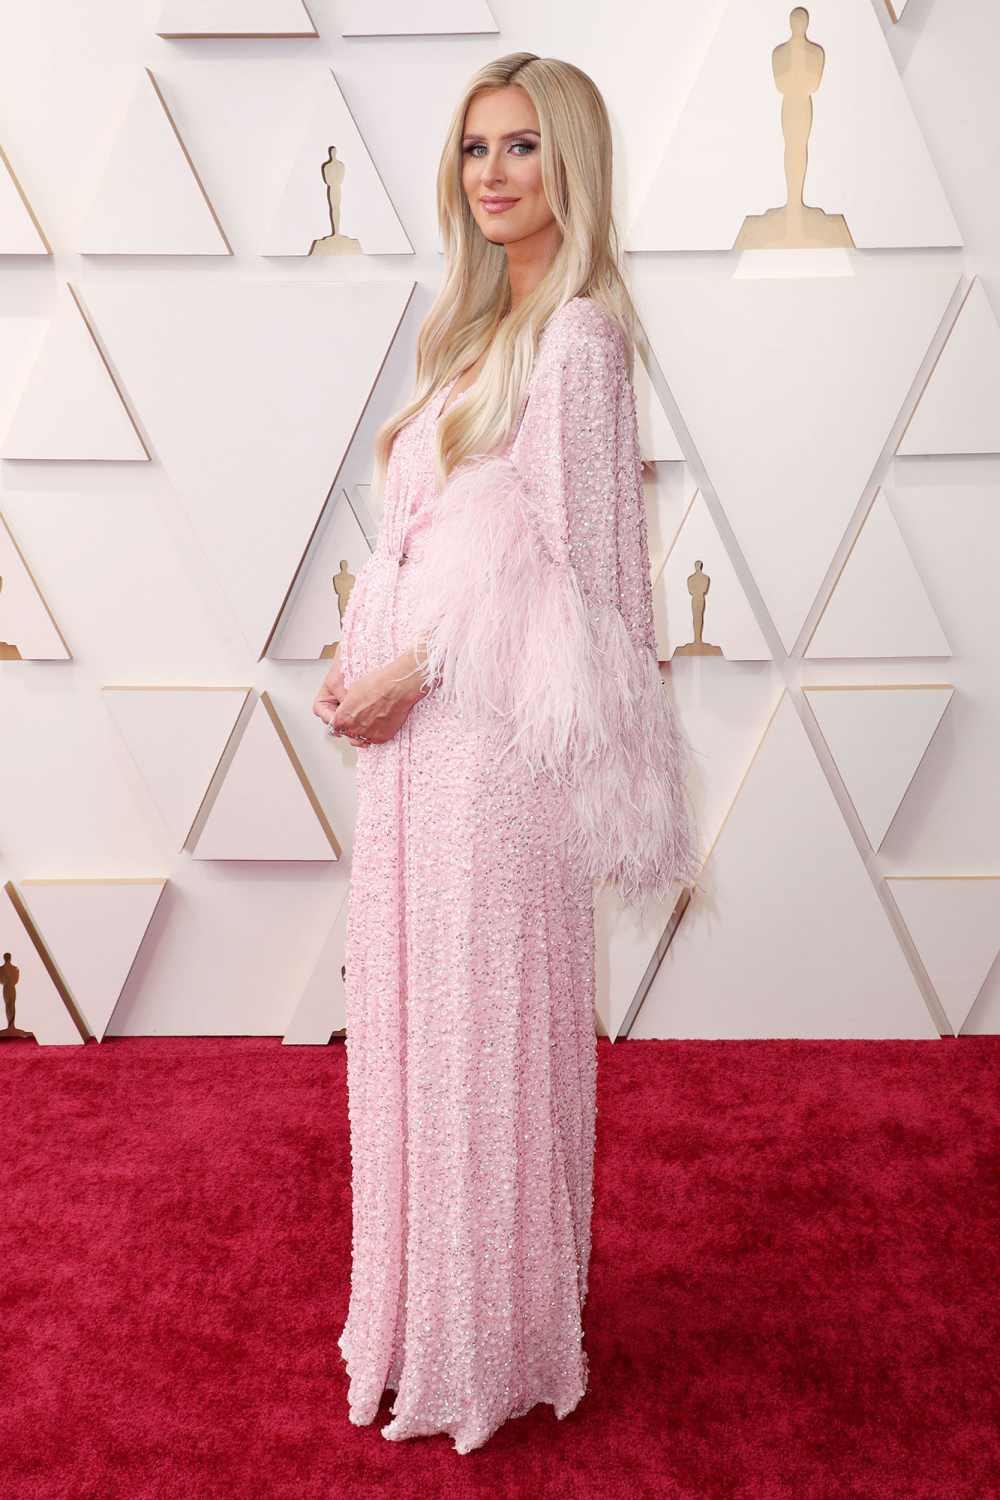 2020 Oscars fashion: Stars step out in sustainable looks - Los